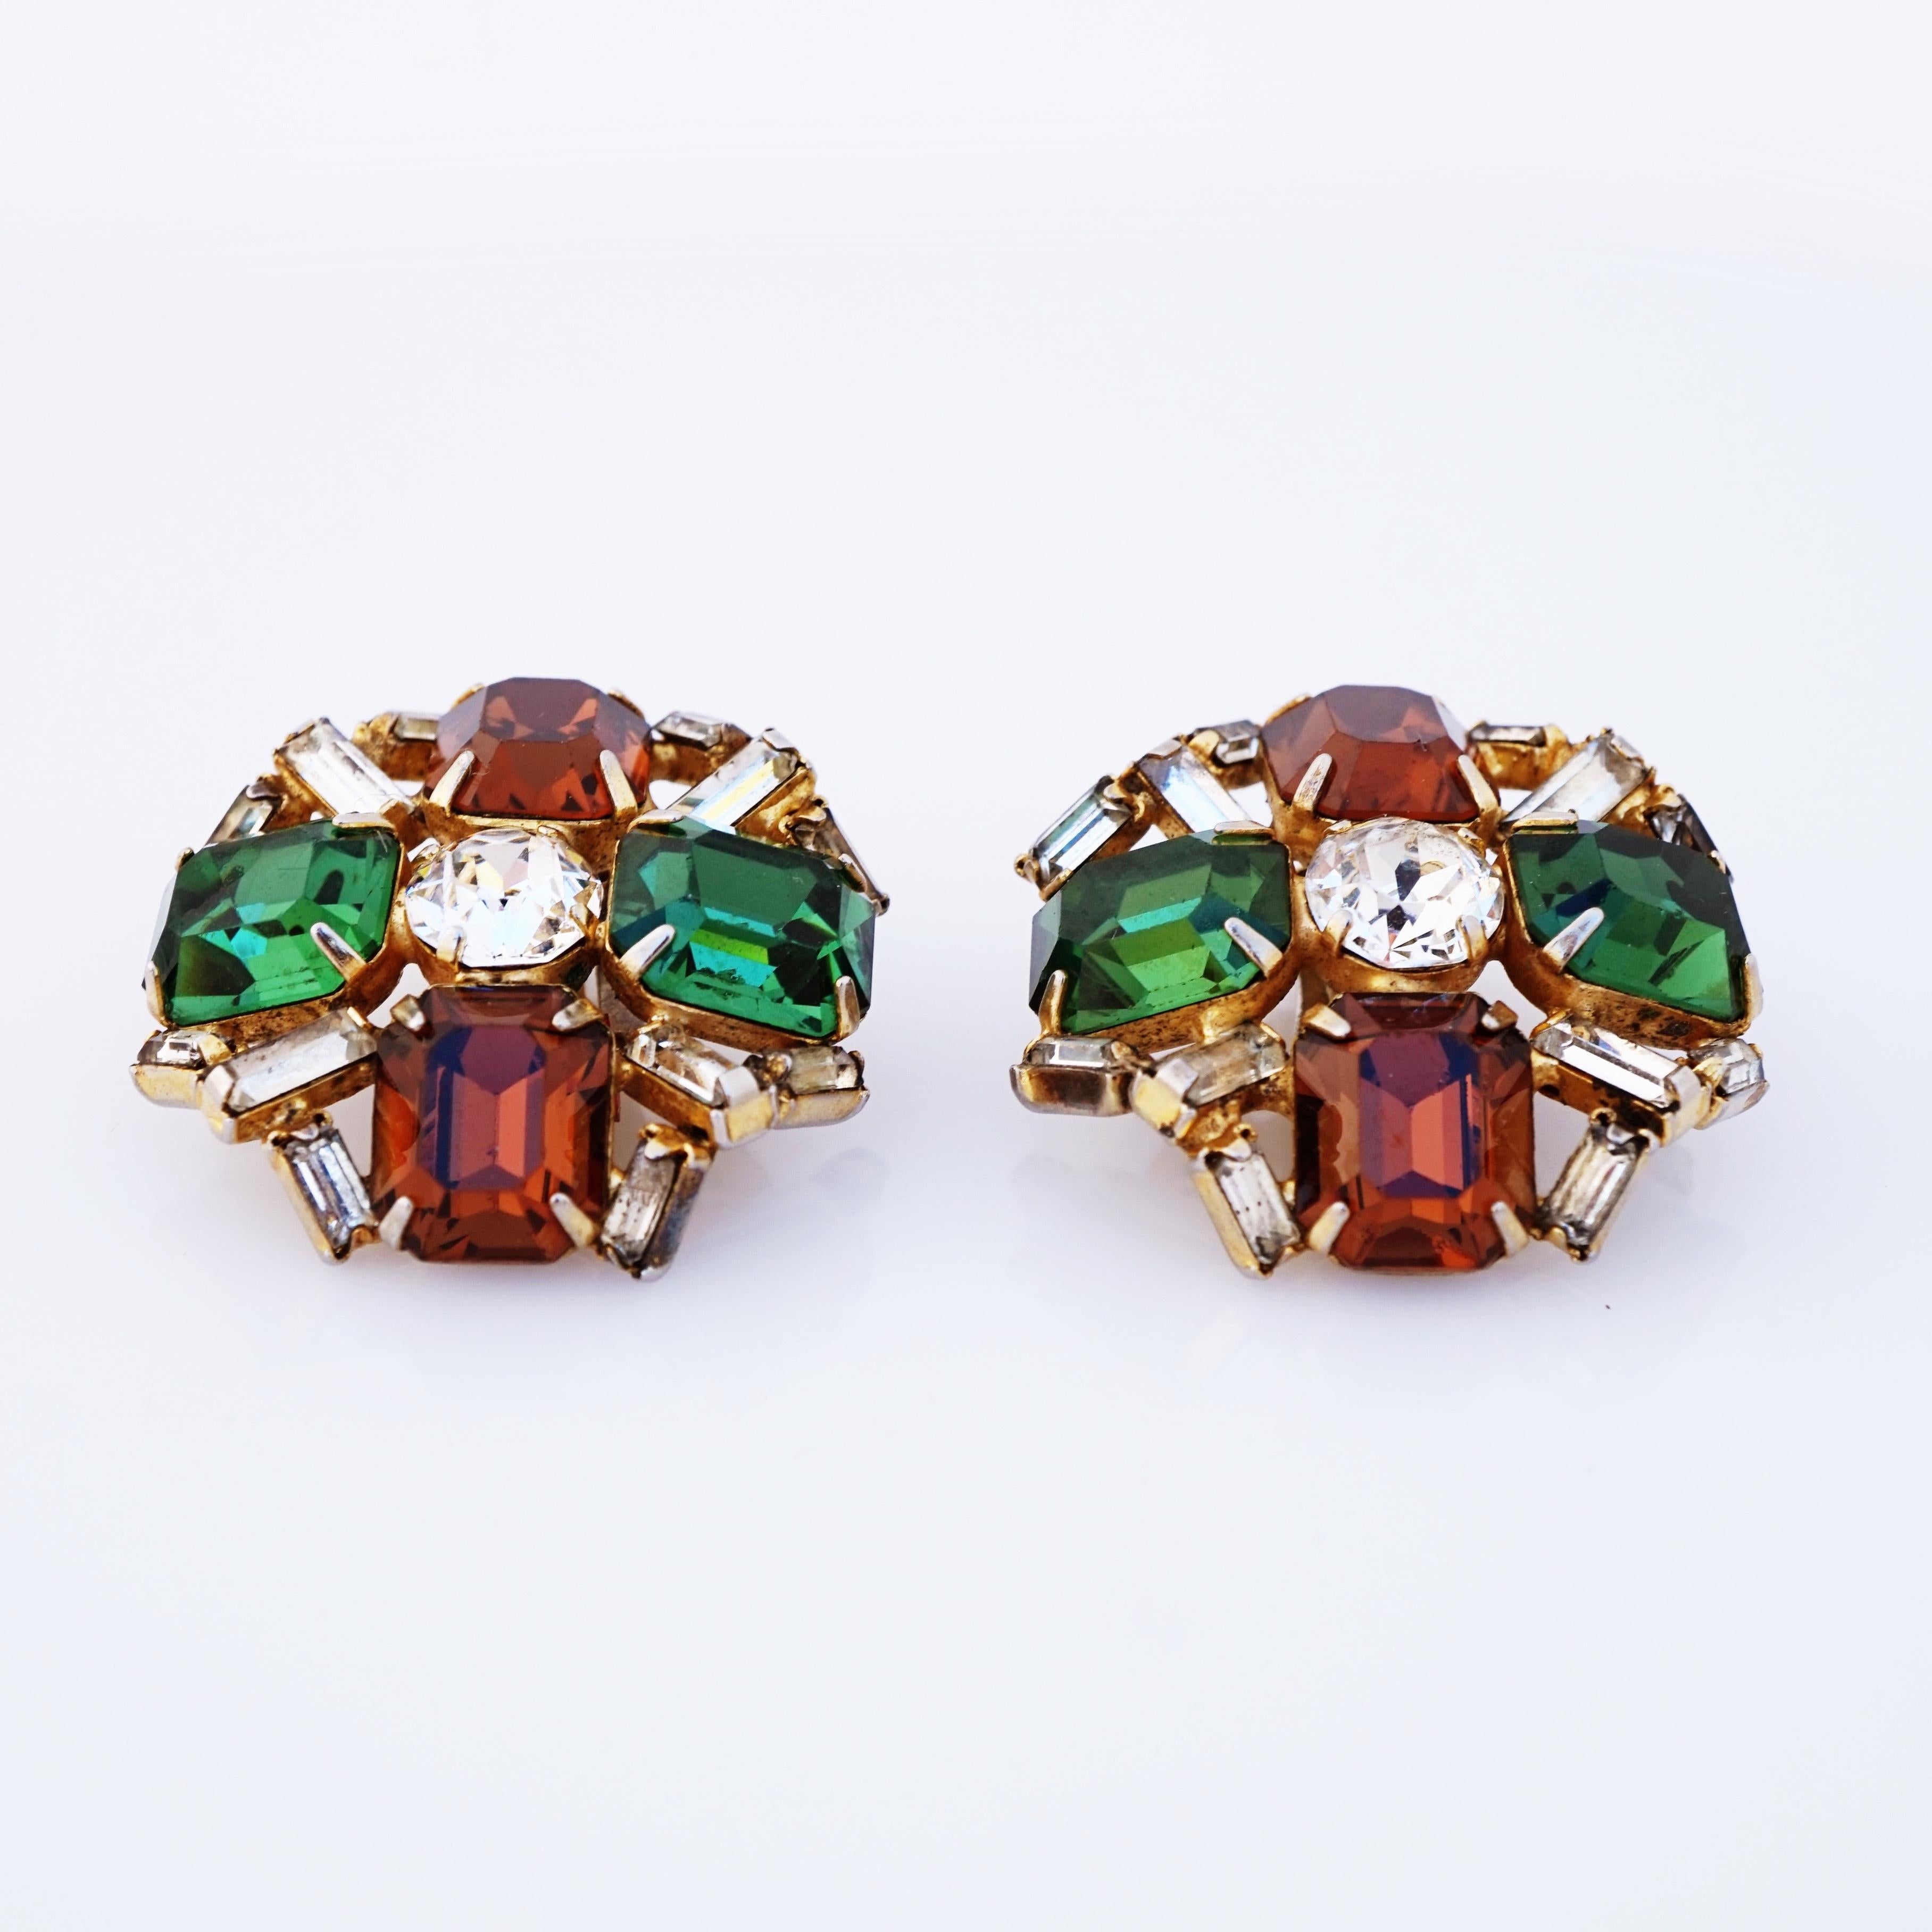 Smoked Topaz and Emerald Rhinestone Crystal Statement Earrings By Hobé, 1960s In Good Condition For Sale In McKinney, TX